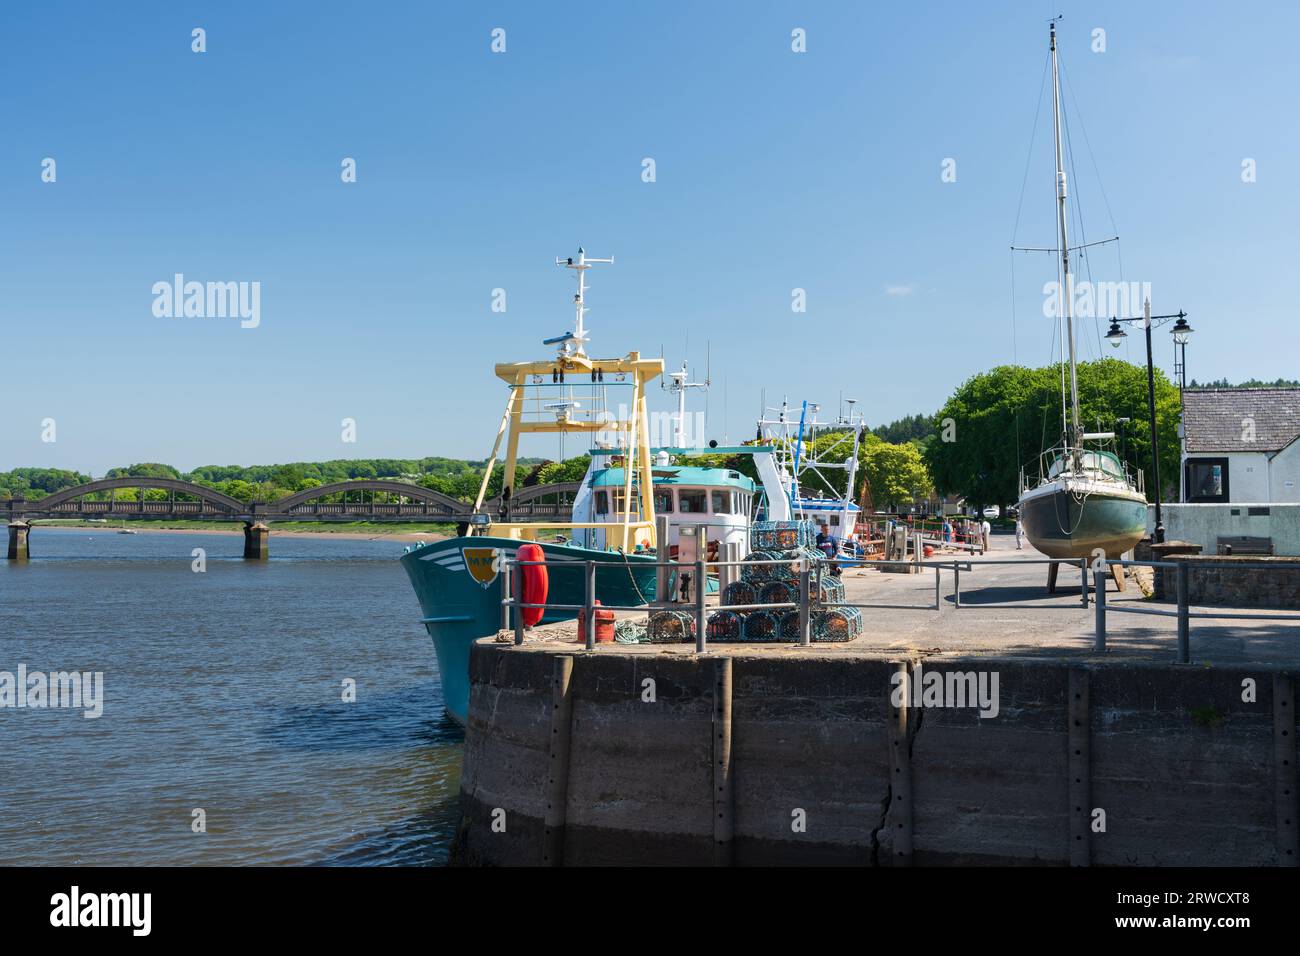 Fishing boats in the working fishing port of Kirkudbright. Stock Photo